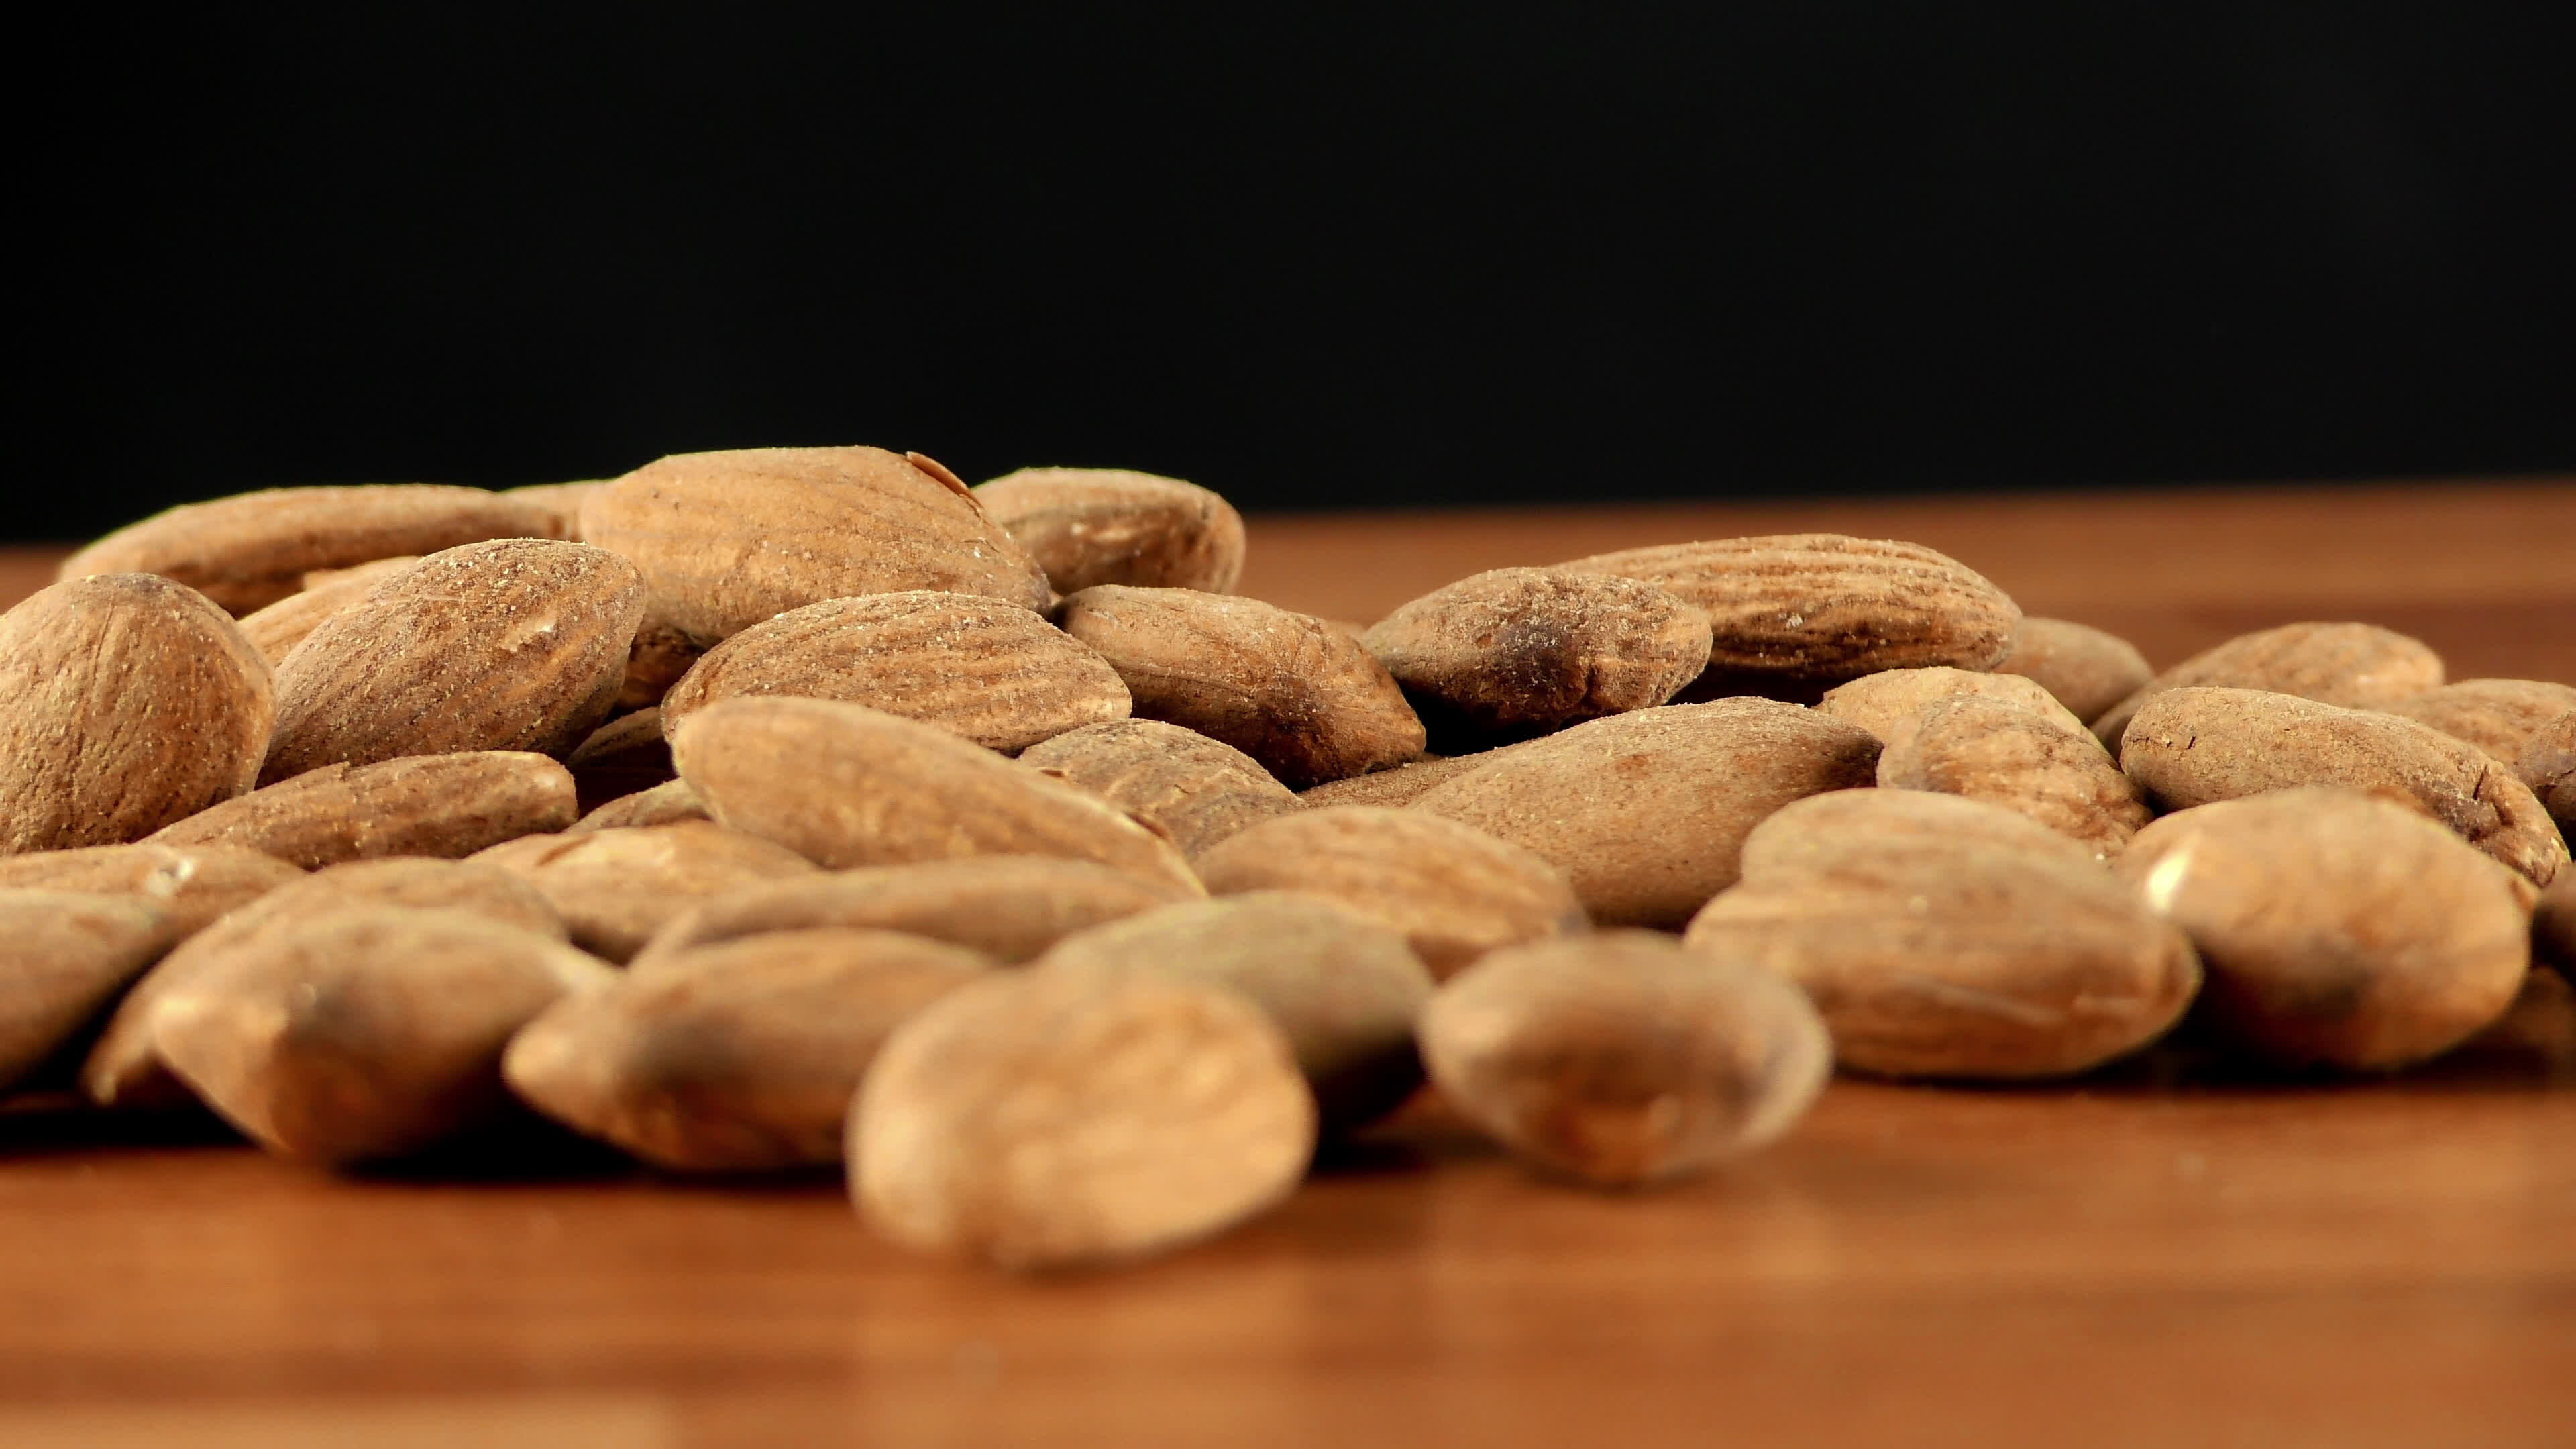 Wooden background almonds, Stock video charm, Almond's rustic appeal, Natural beauty captured, 3840x2160 4K Desktop